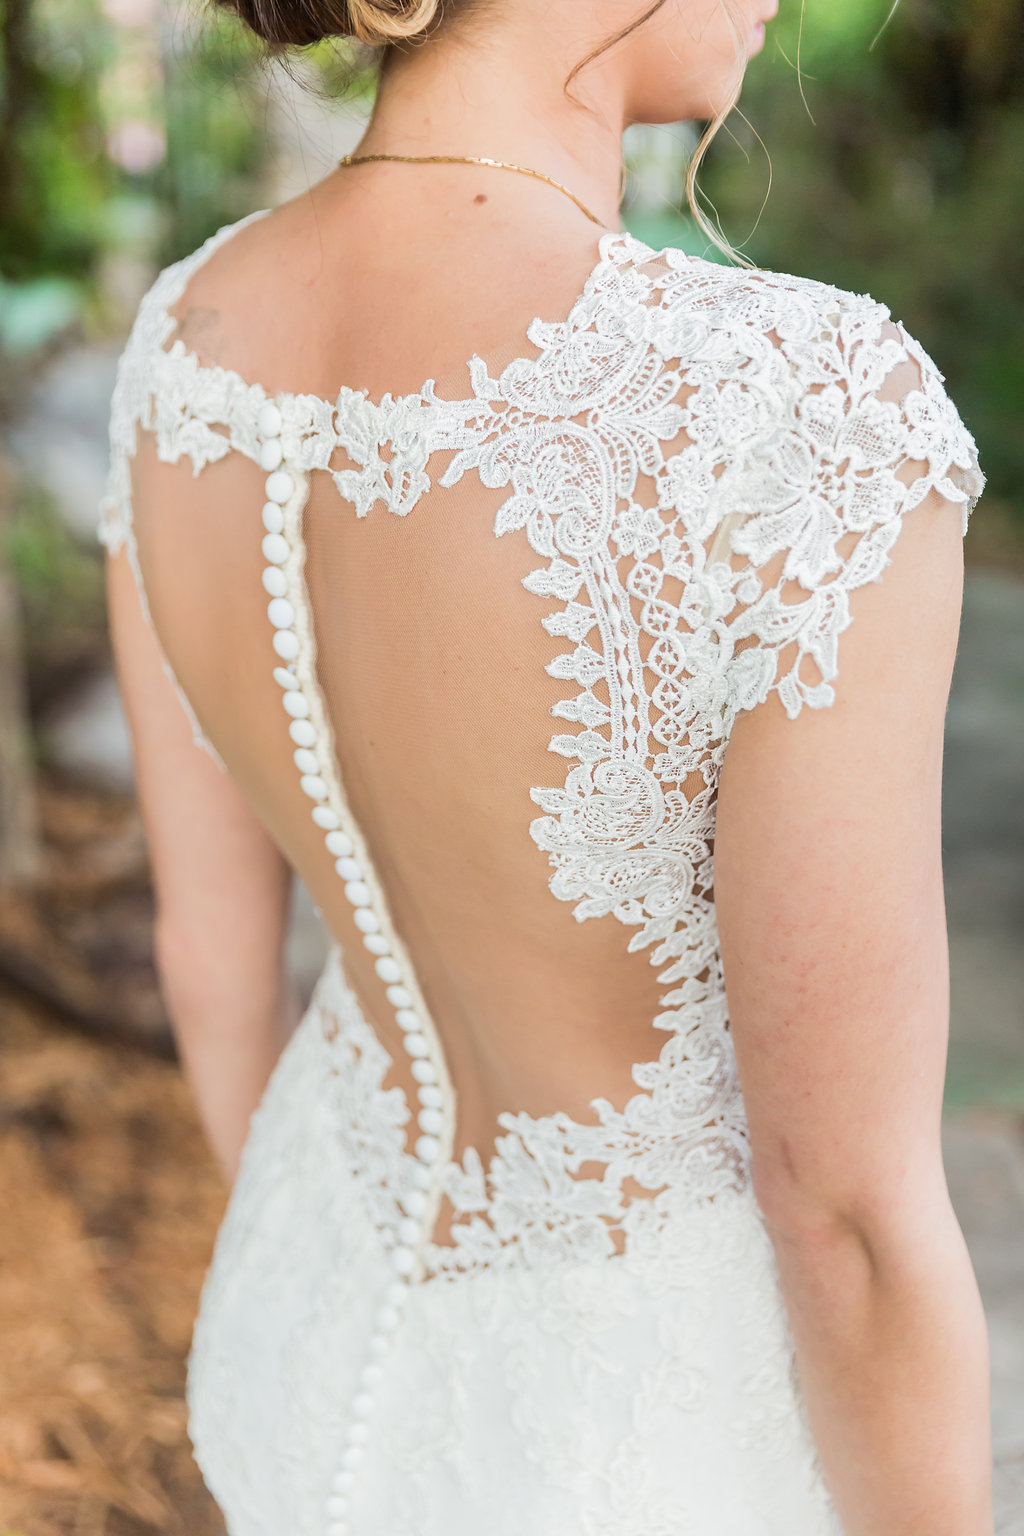 The bride wore a beautiful lace wedding dress with low back, beaded back, and lace cap sleeves